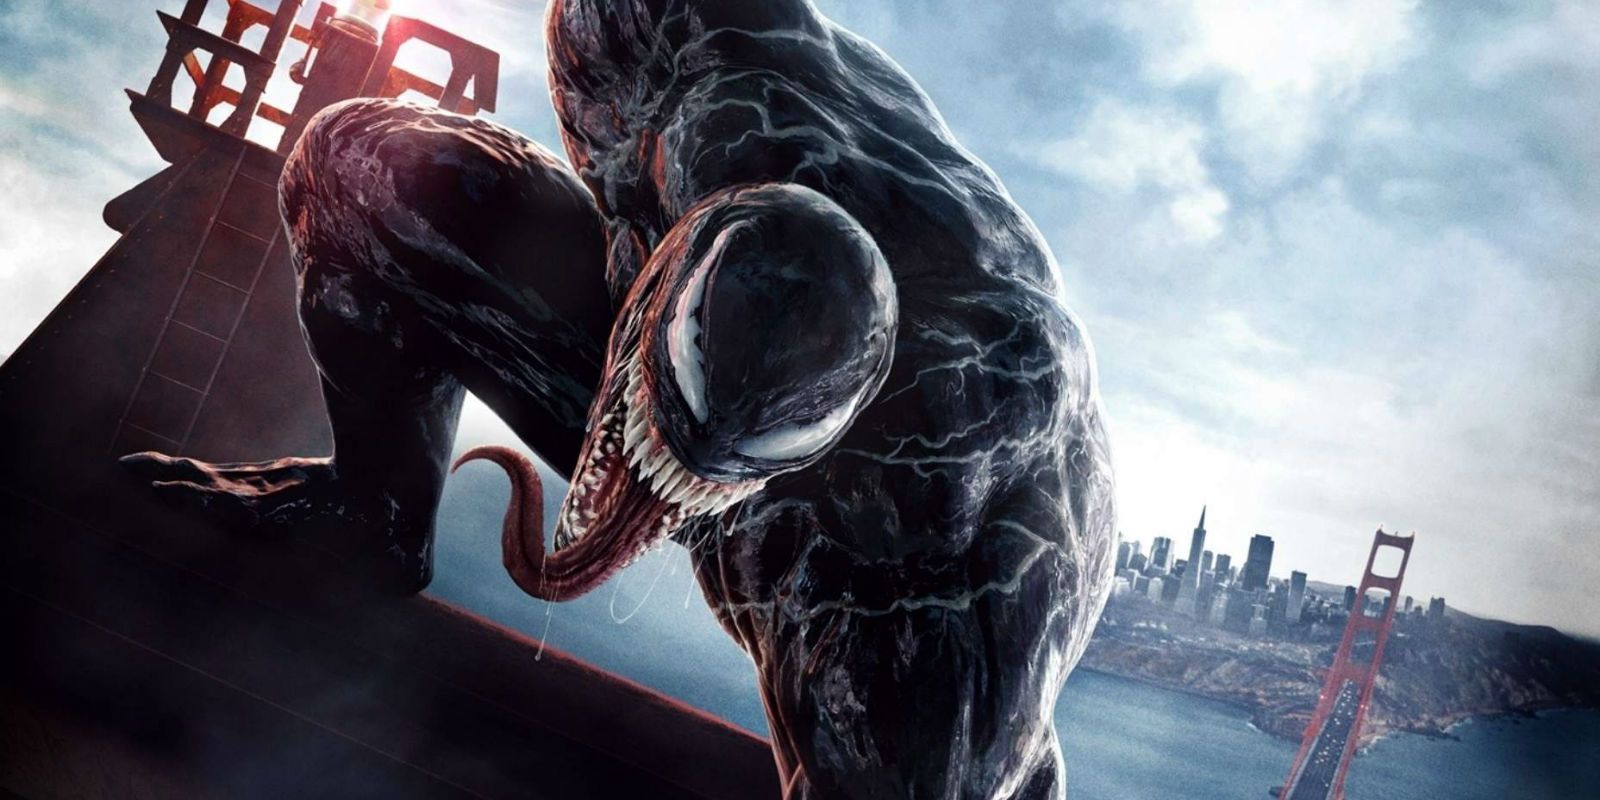 How Venom Became The Biggest Box Office Surprise of 2018